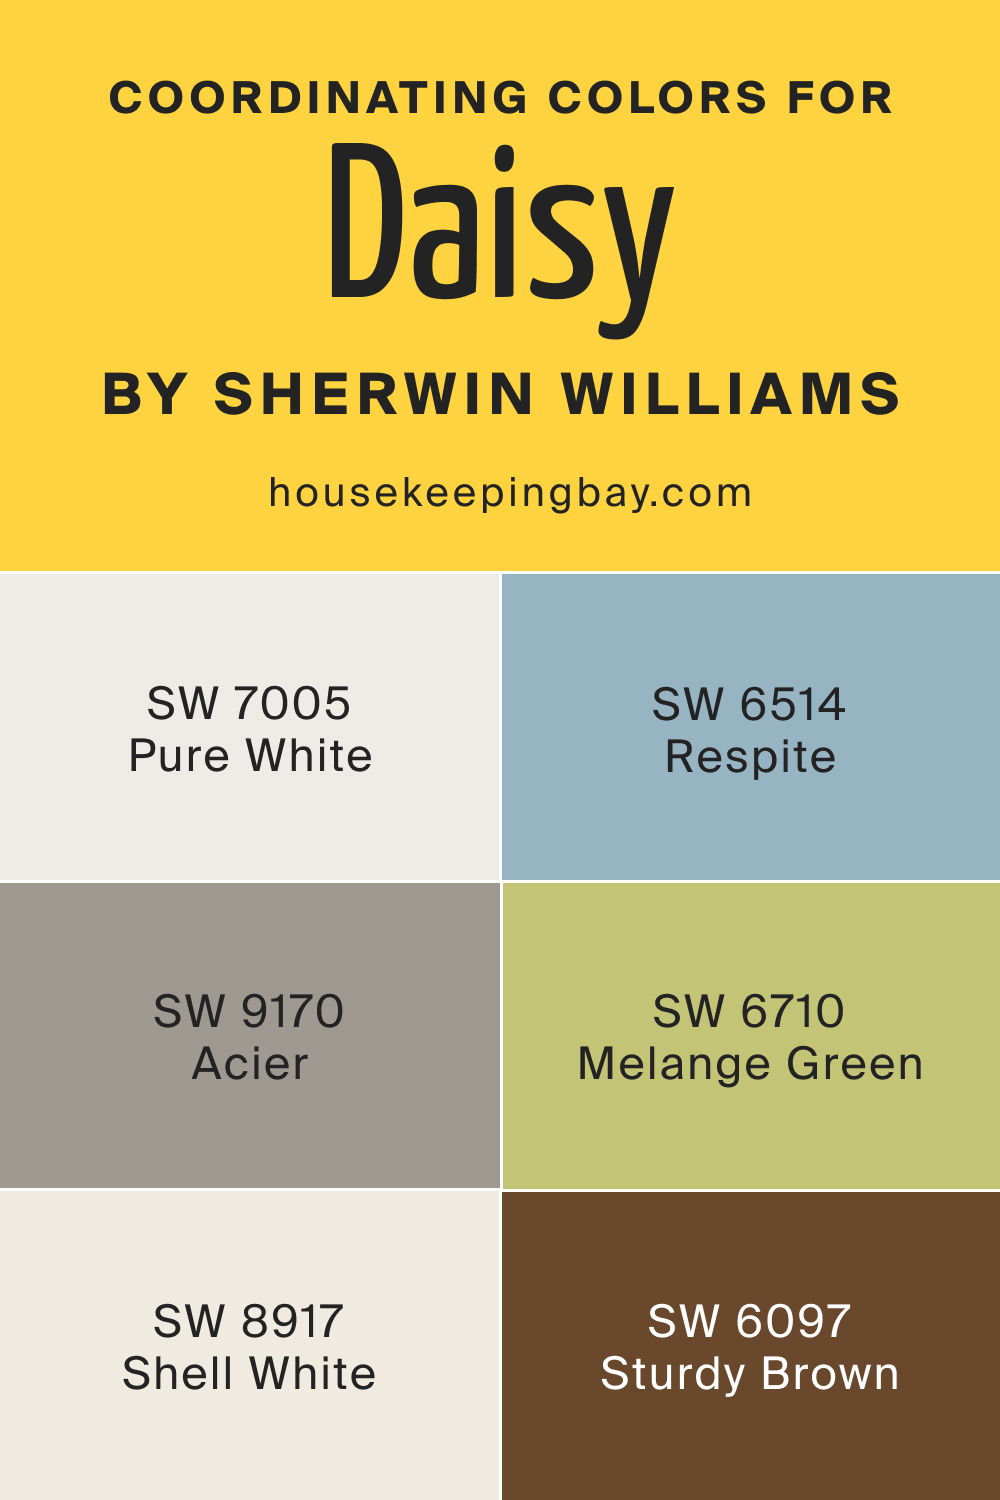 Coordinating Colors for Daisy SW 6910 by Sherwin Williams